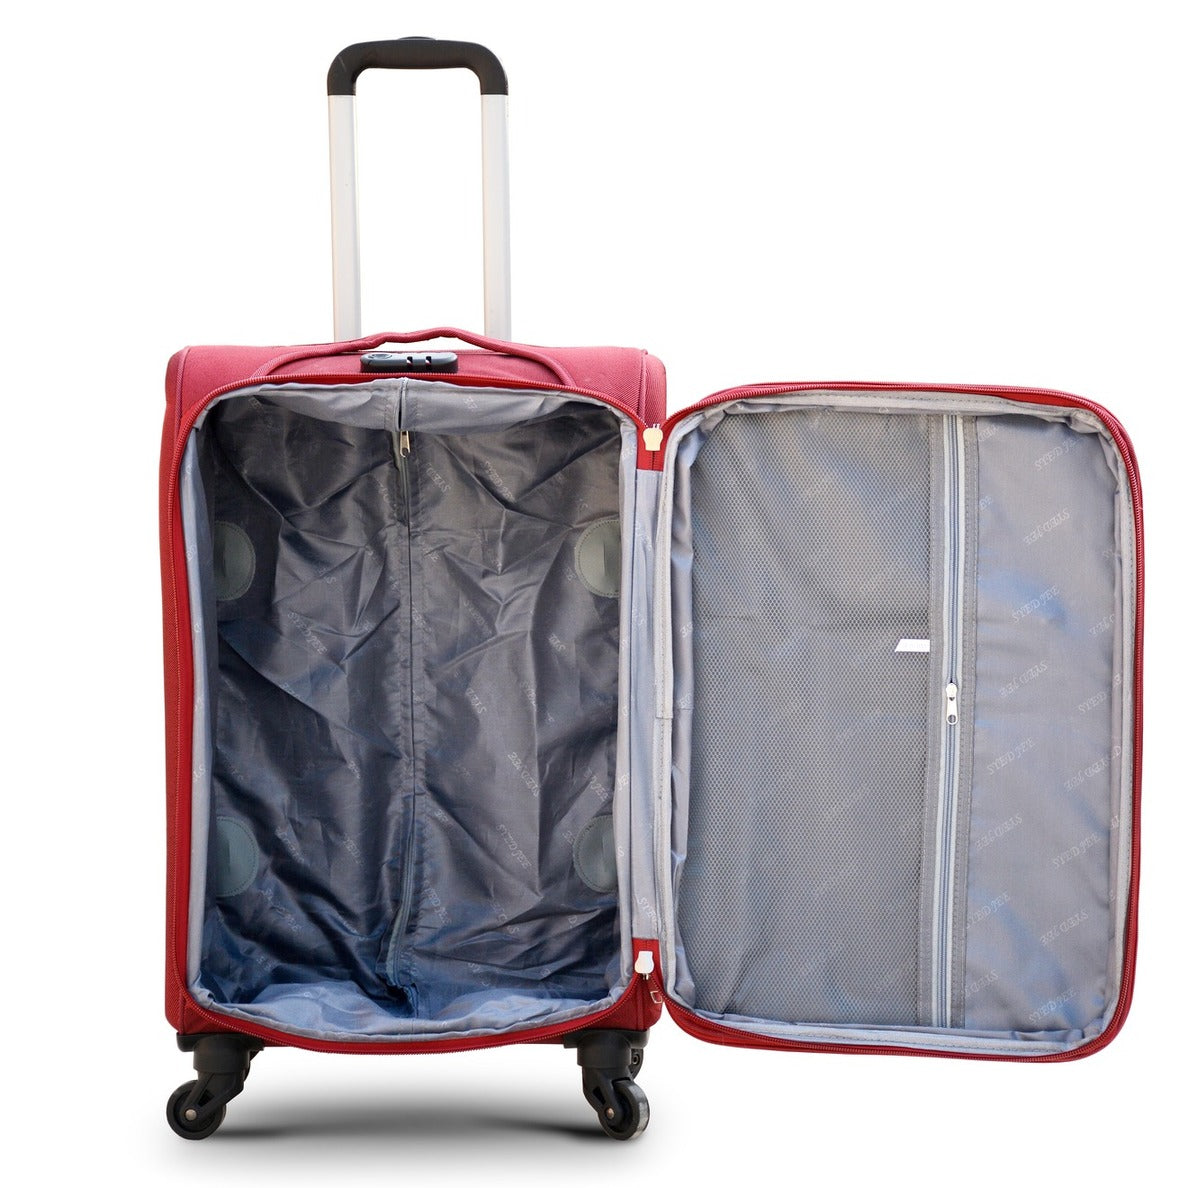 4 Piece Set 20" 24" 28" 32 Inches Red SJ JIAN 4 Wheel Soft Material Lightweight Luggage Bag